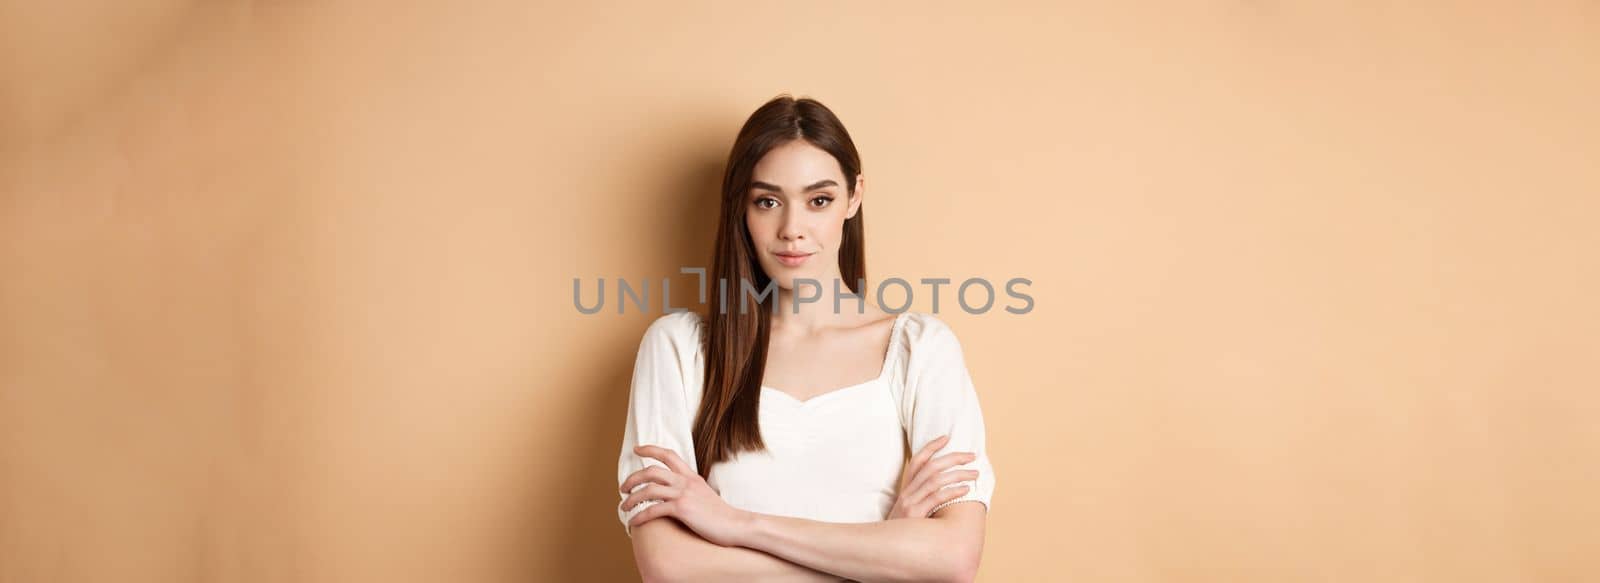 Young caucasian woman looking determined and confident, standing with arms crossed, smiling at camera, wearing white dress, beige background.